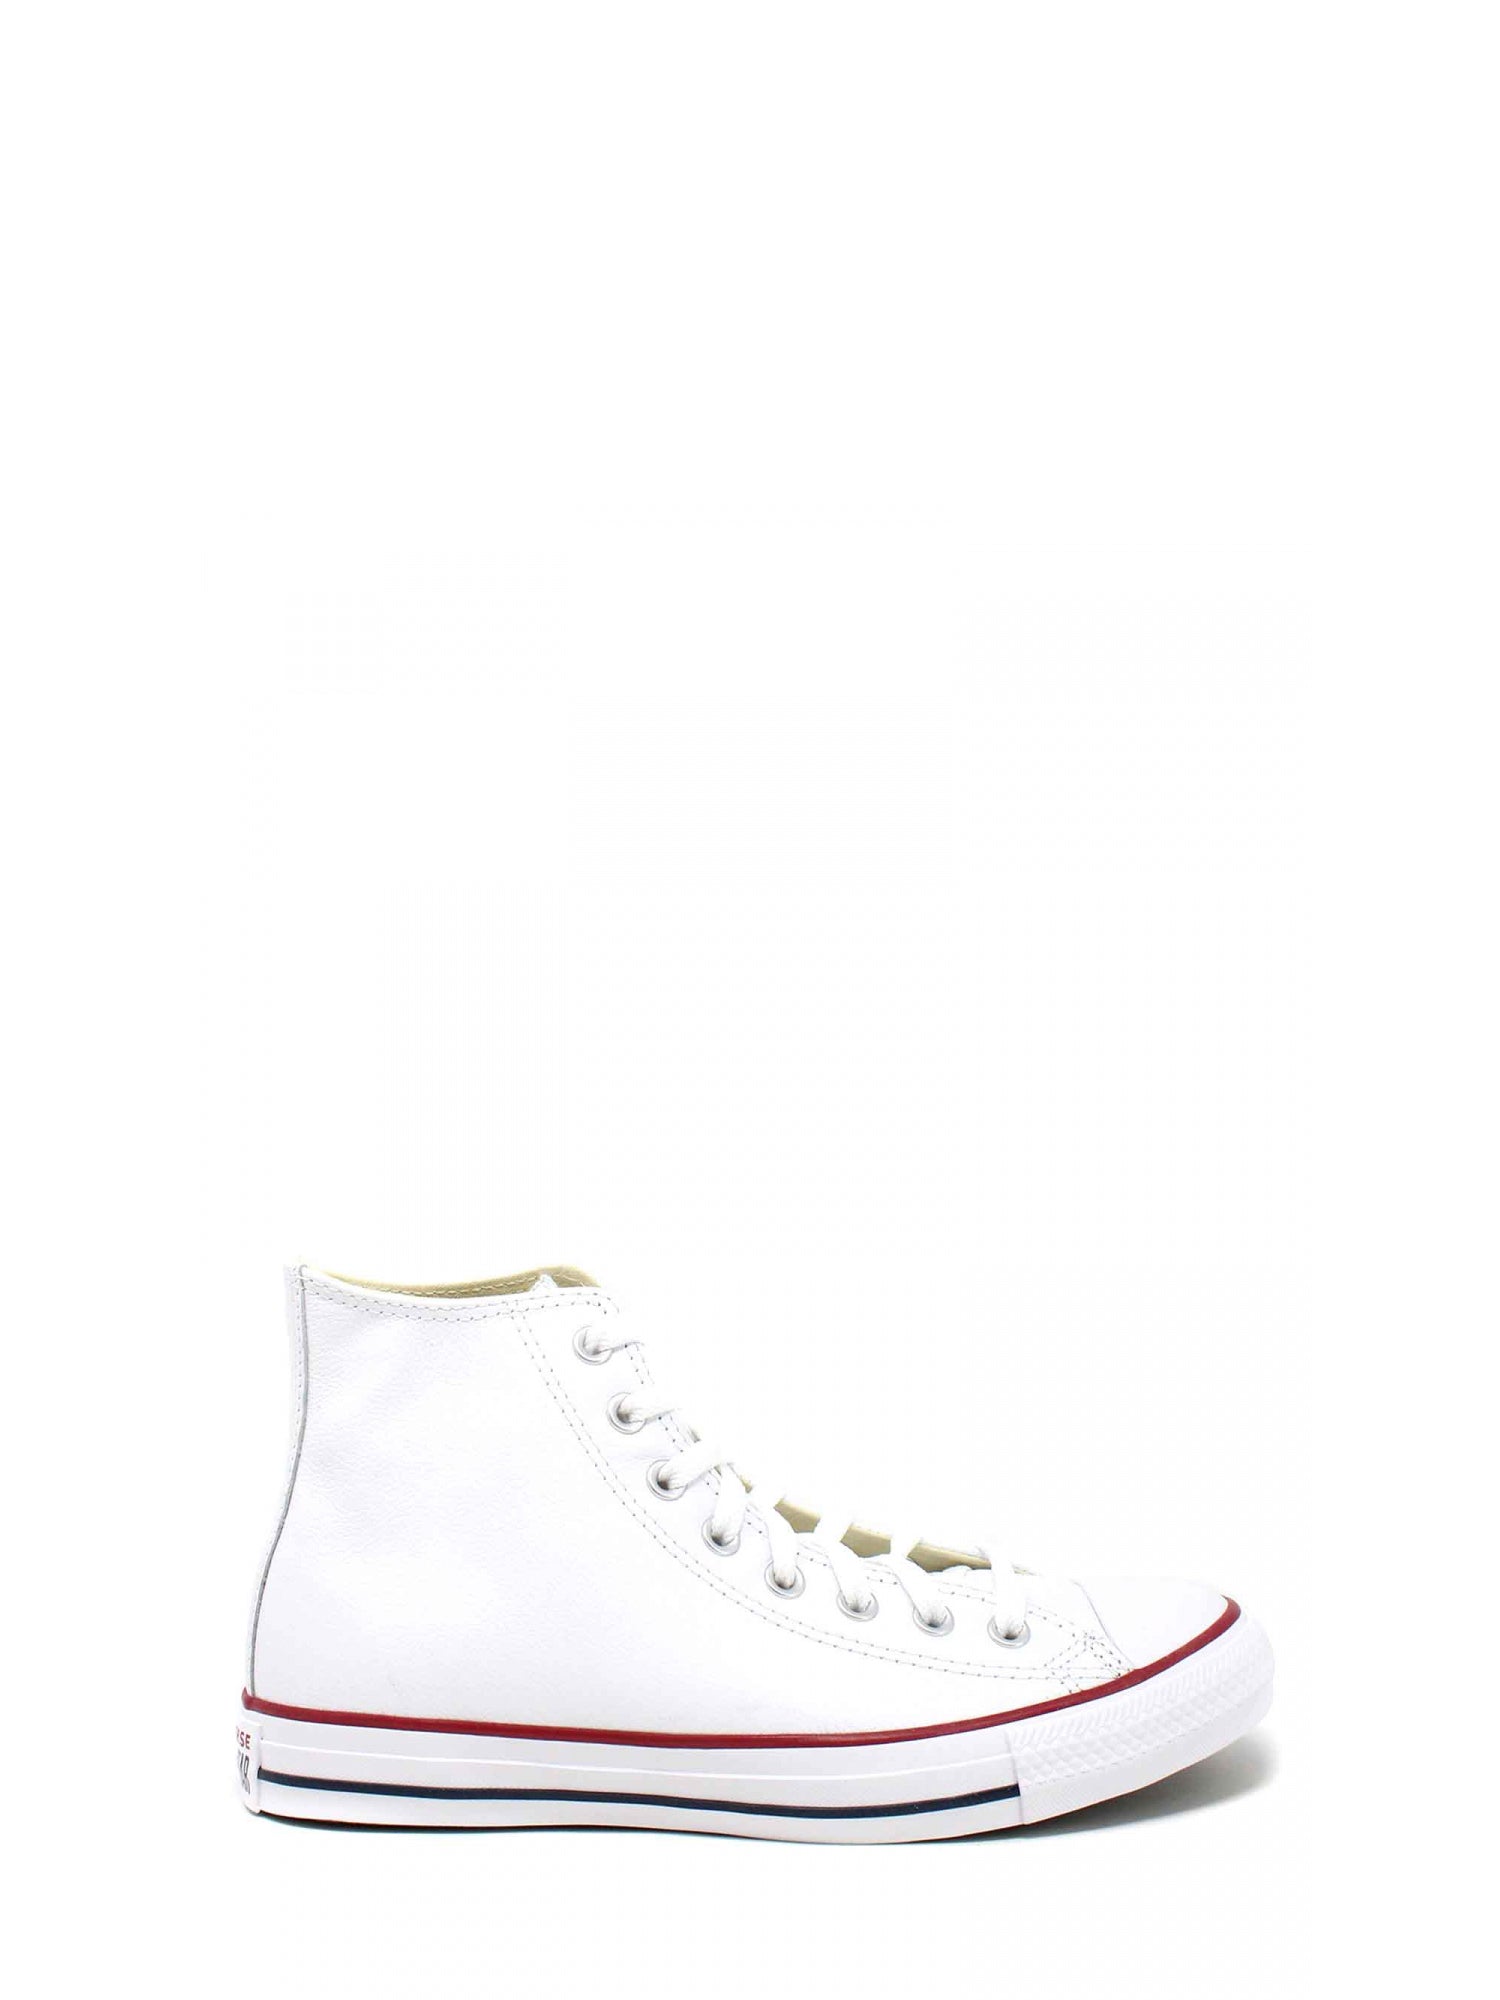 CONVERSE SNEAKERS CHUCK TAYLOR ALL STAR MONO LEATHER BIANCO